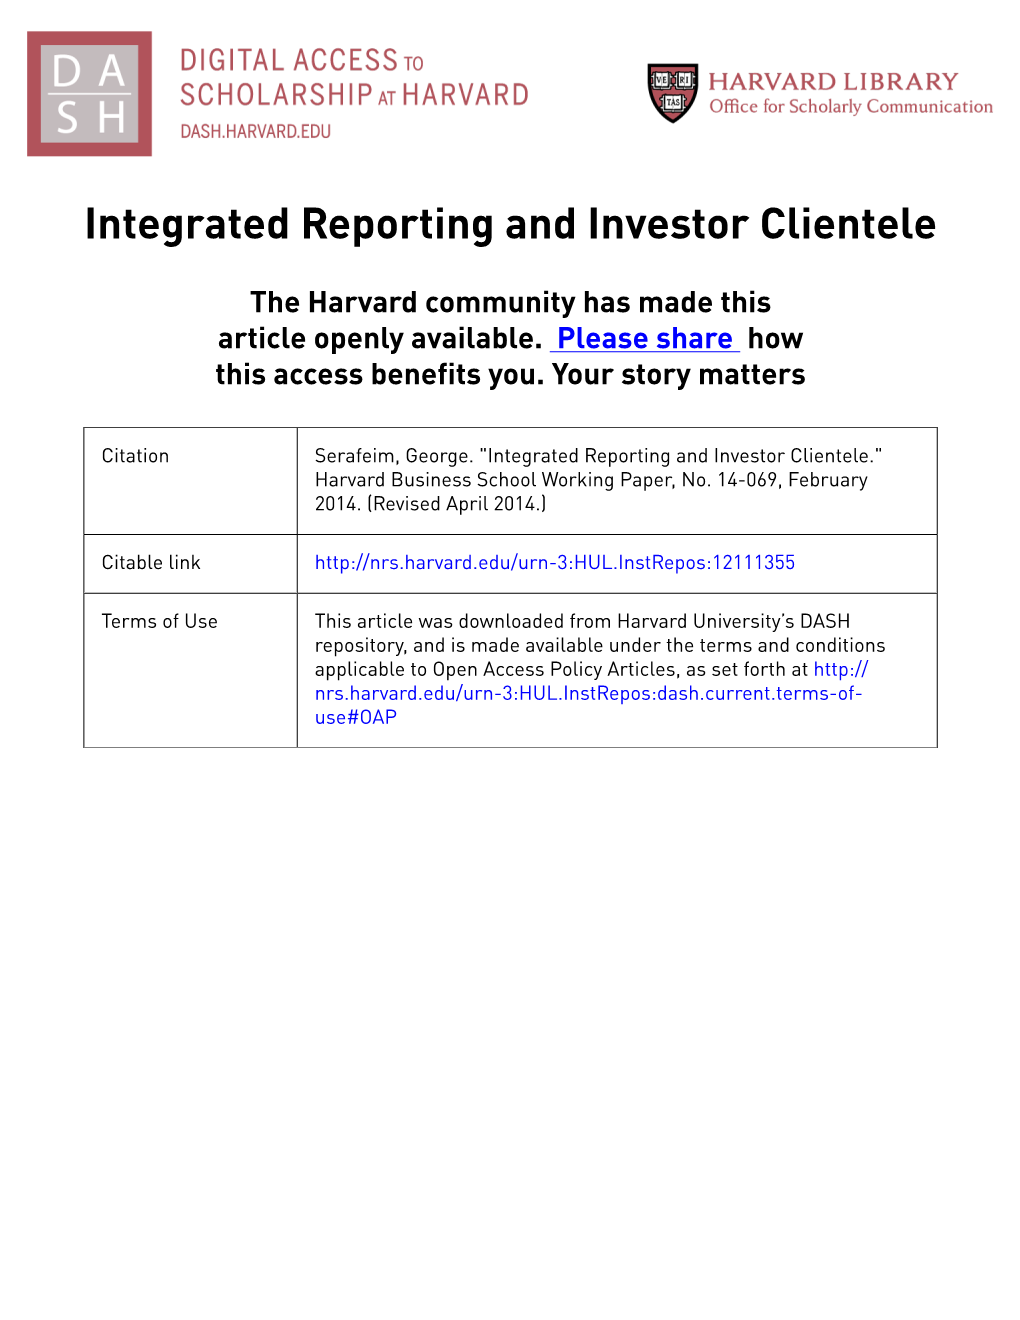 Integrated Reporting and Investor Clientele